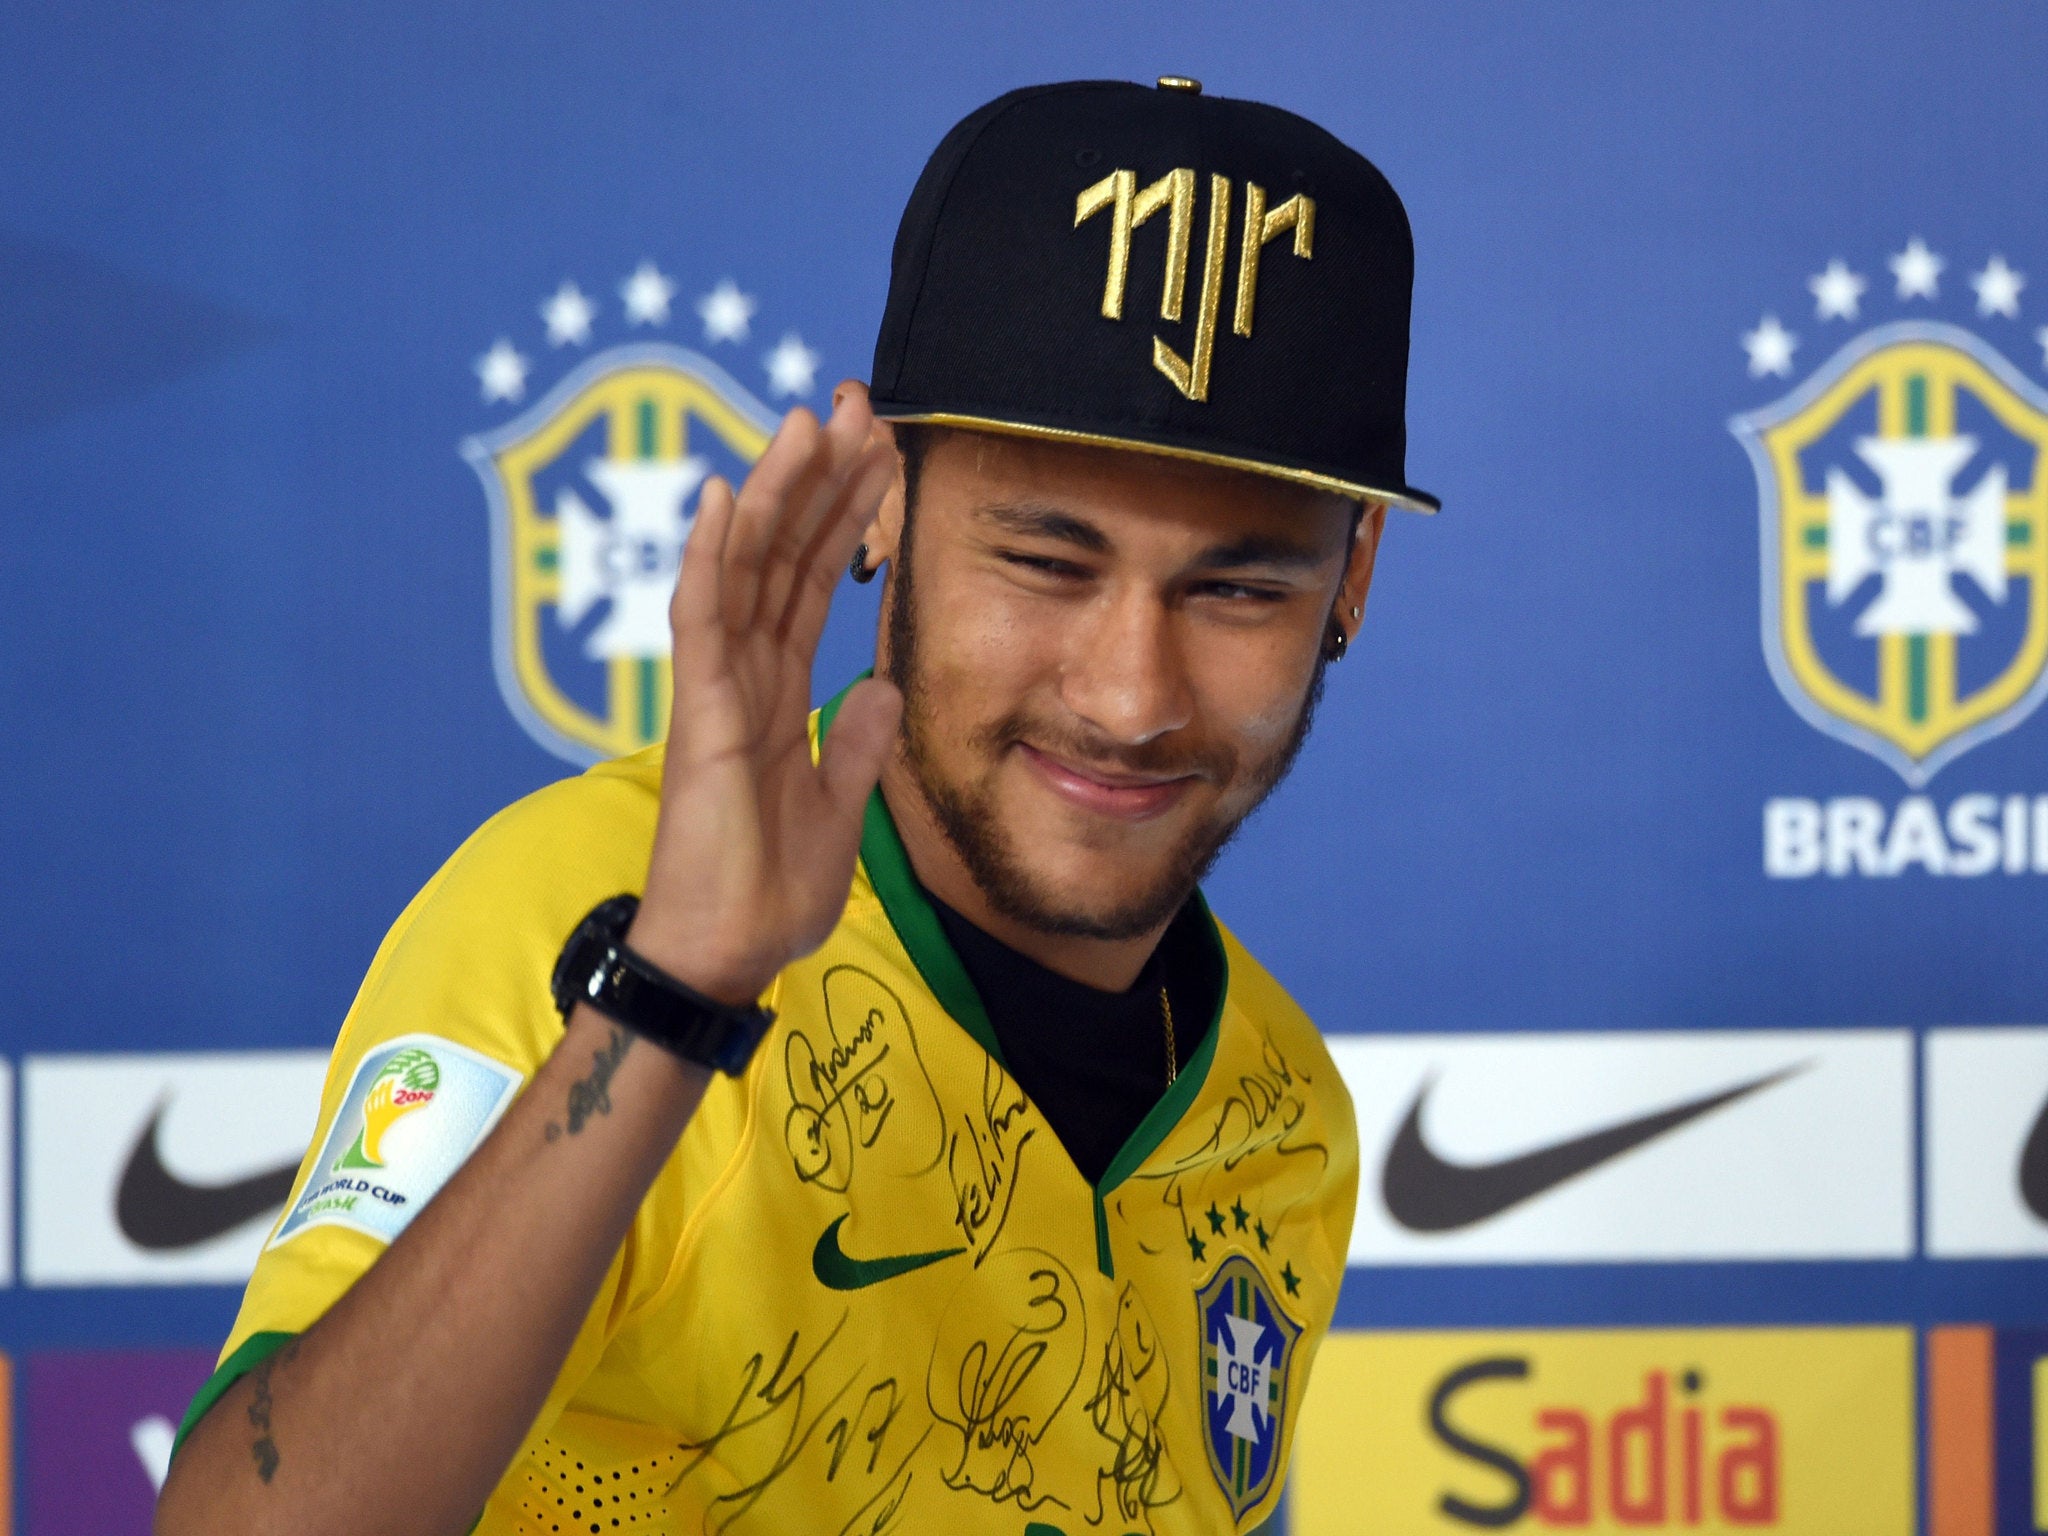 Brazil's forward Neymar gestures during a press conference in Teresopolis on July 10, 2014, during the FIFA World Cup.